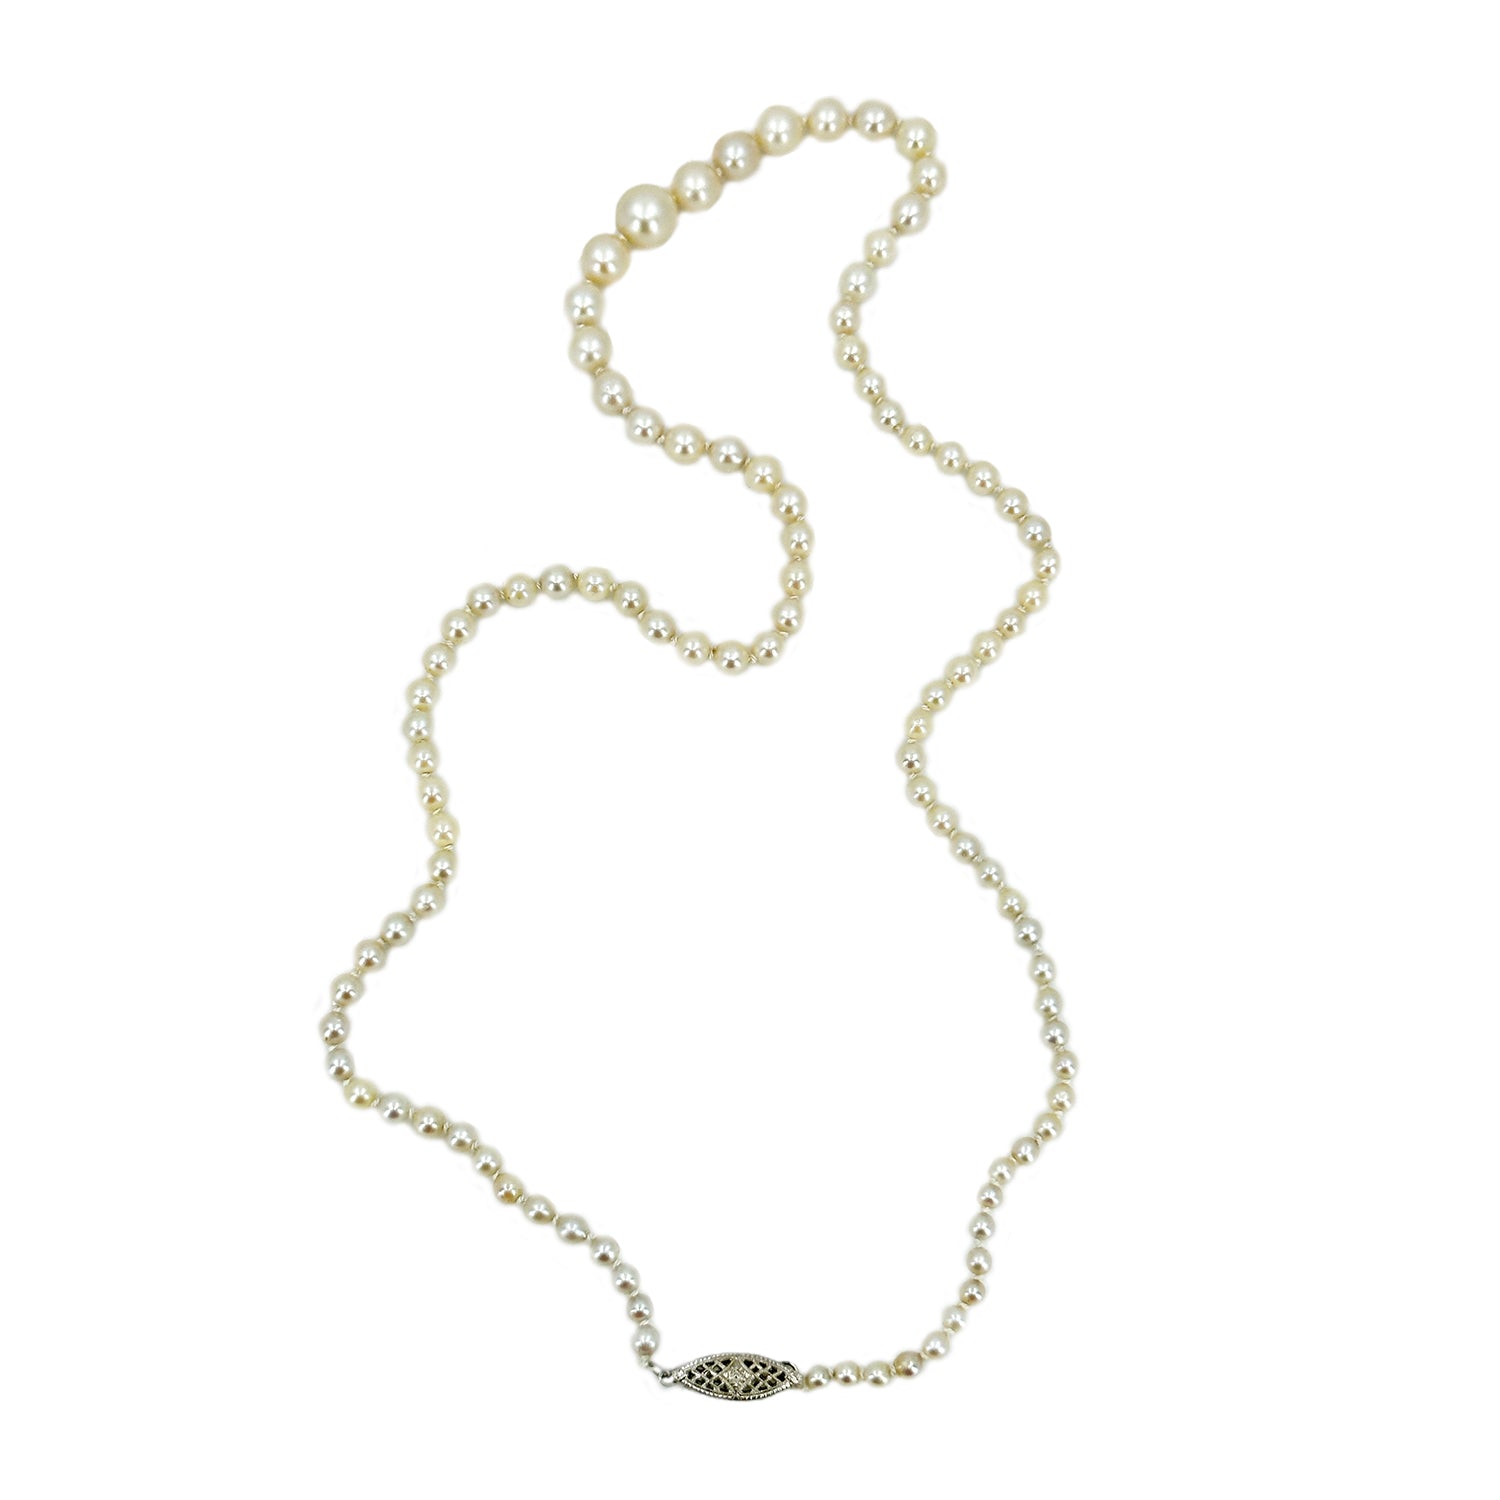 Filigree Art Deco Japanese Saltwater Cultured Akoya Pearl Graduated Vintage Necklace - Sterling Silver 20.50 Inch